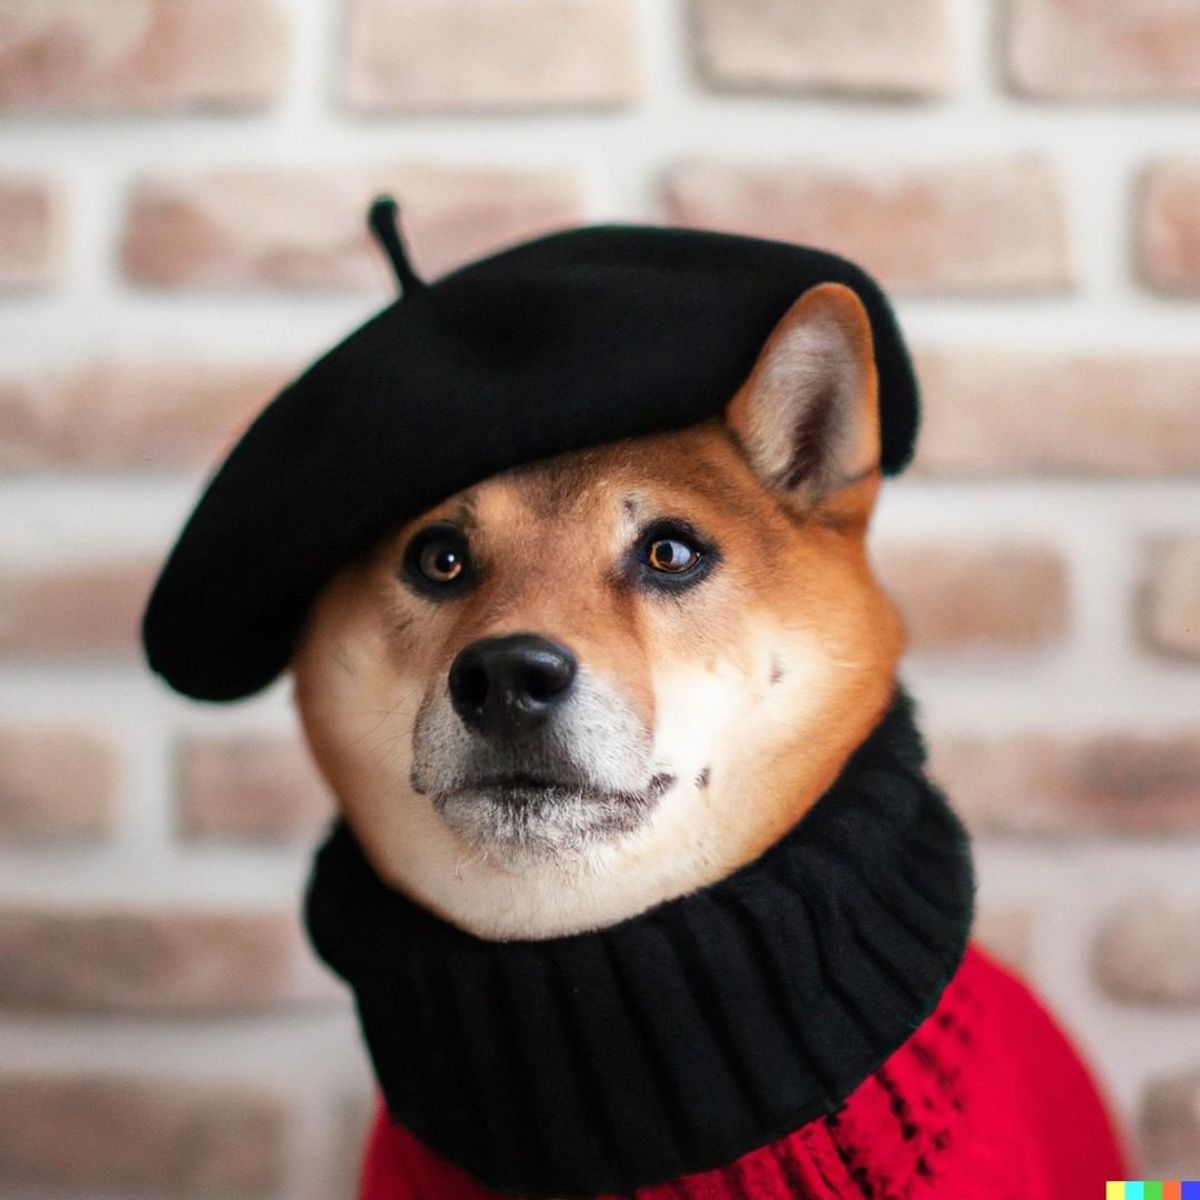 A Shiba Inu dog wearing a beret and black turtleneck (Actual text prompt used)